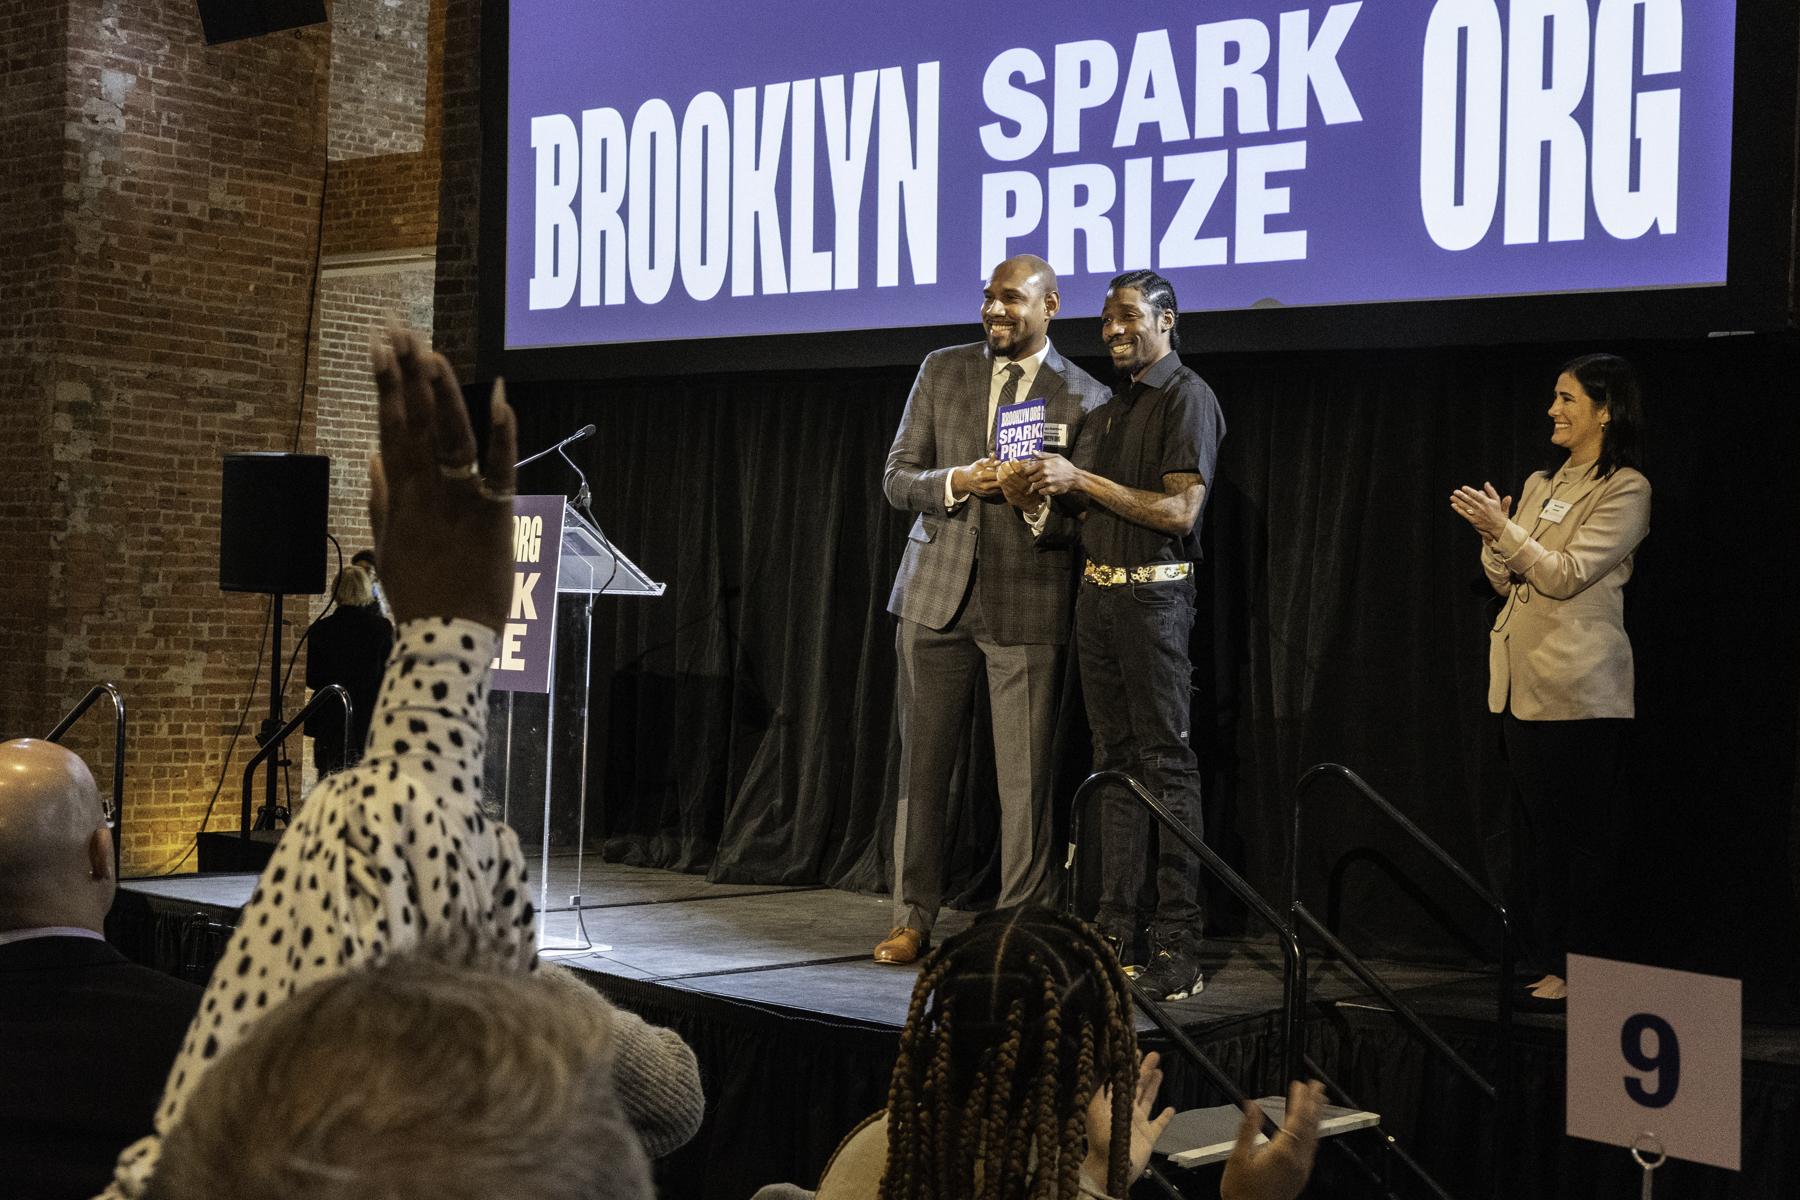 Two individuals holding an award on stage at a brooklyn spark prize event while an audience member raises their hand in applause.